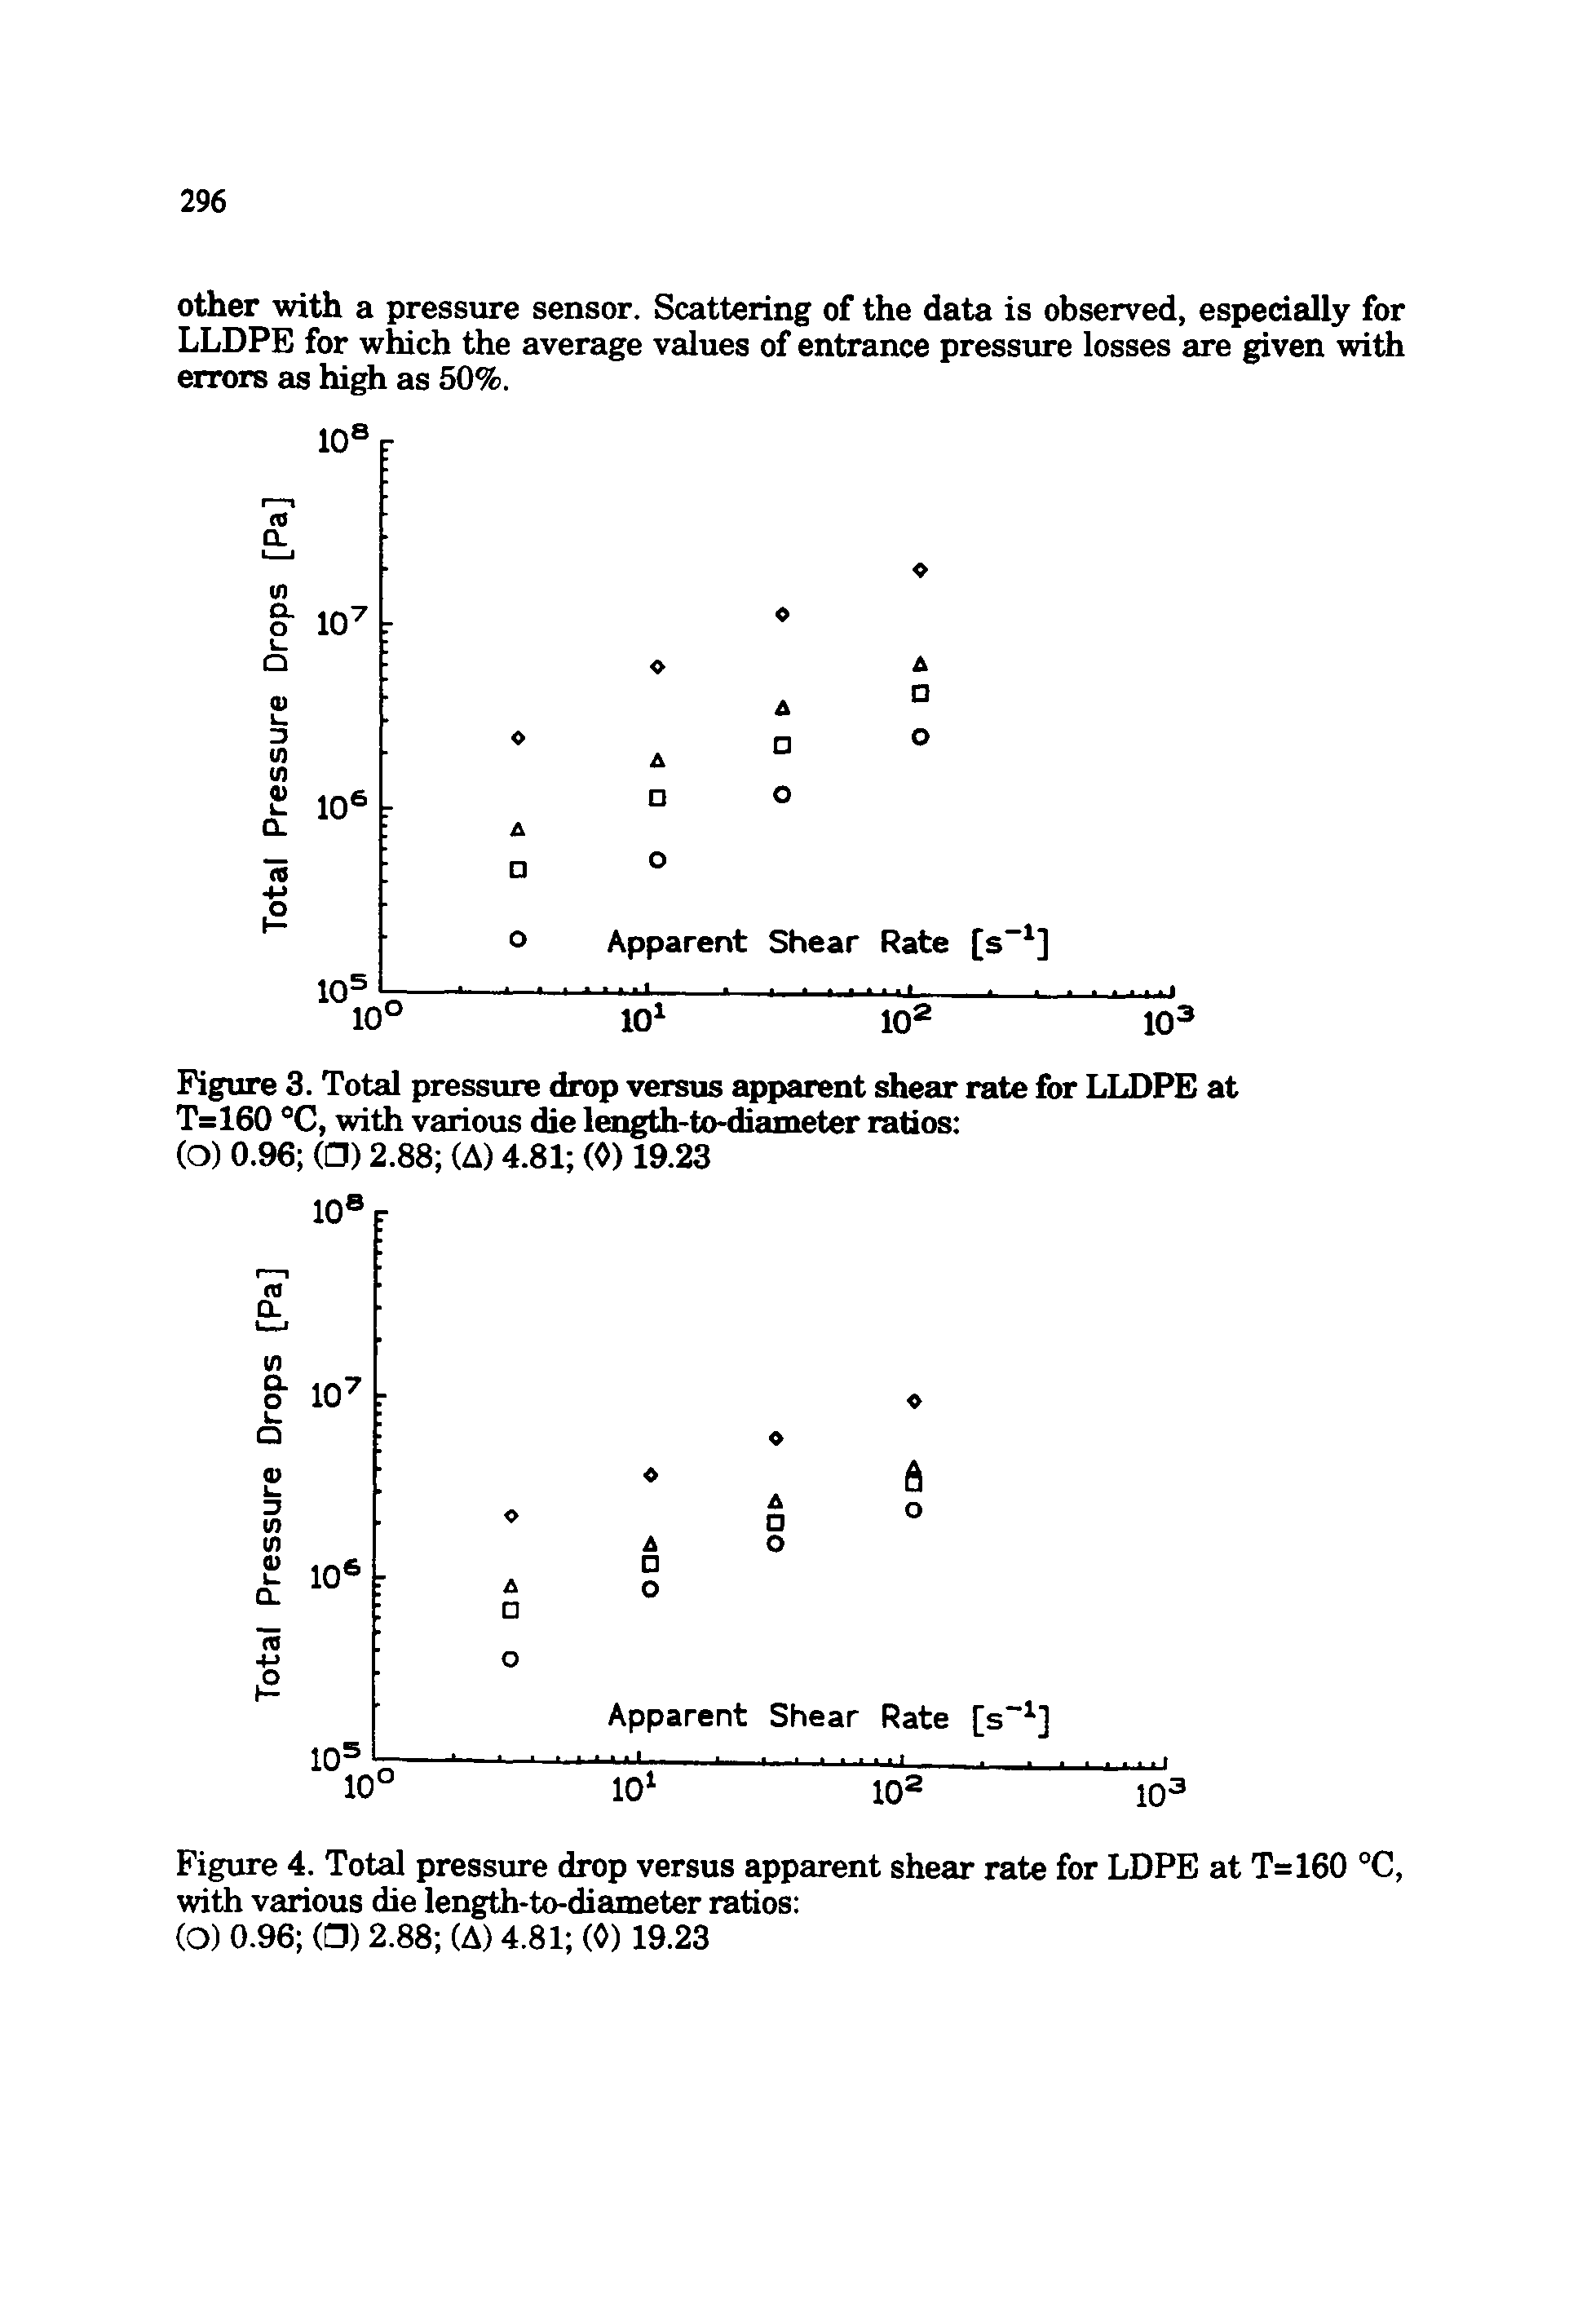 Figure 3. Total pressure drop versus apparent shear rate for LLDPE at T=160 °C, with various die length-to-diameter ratios ...